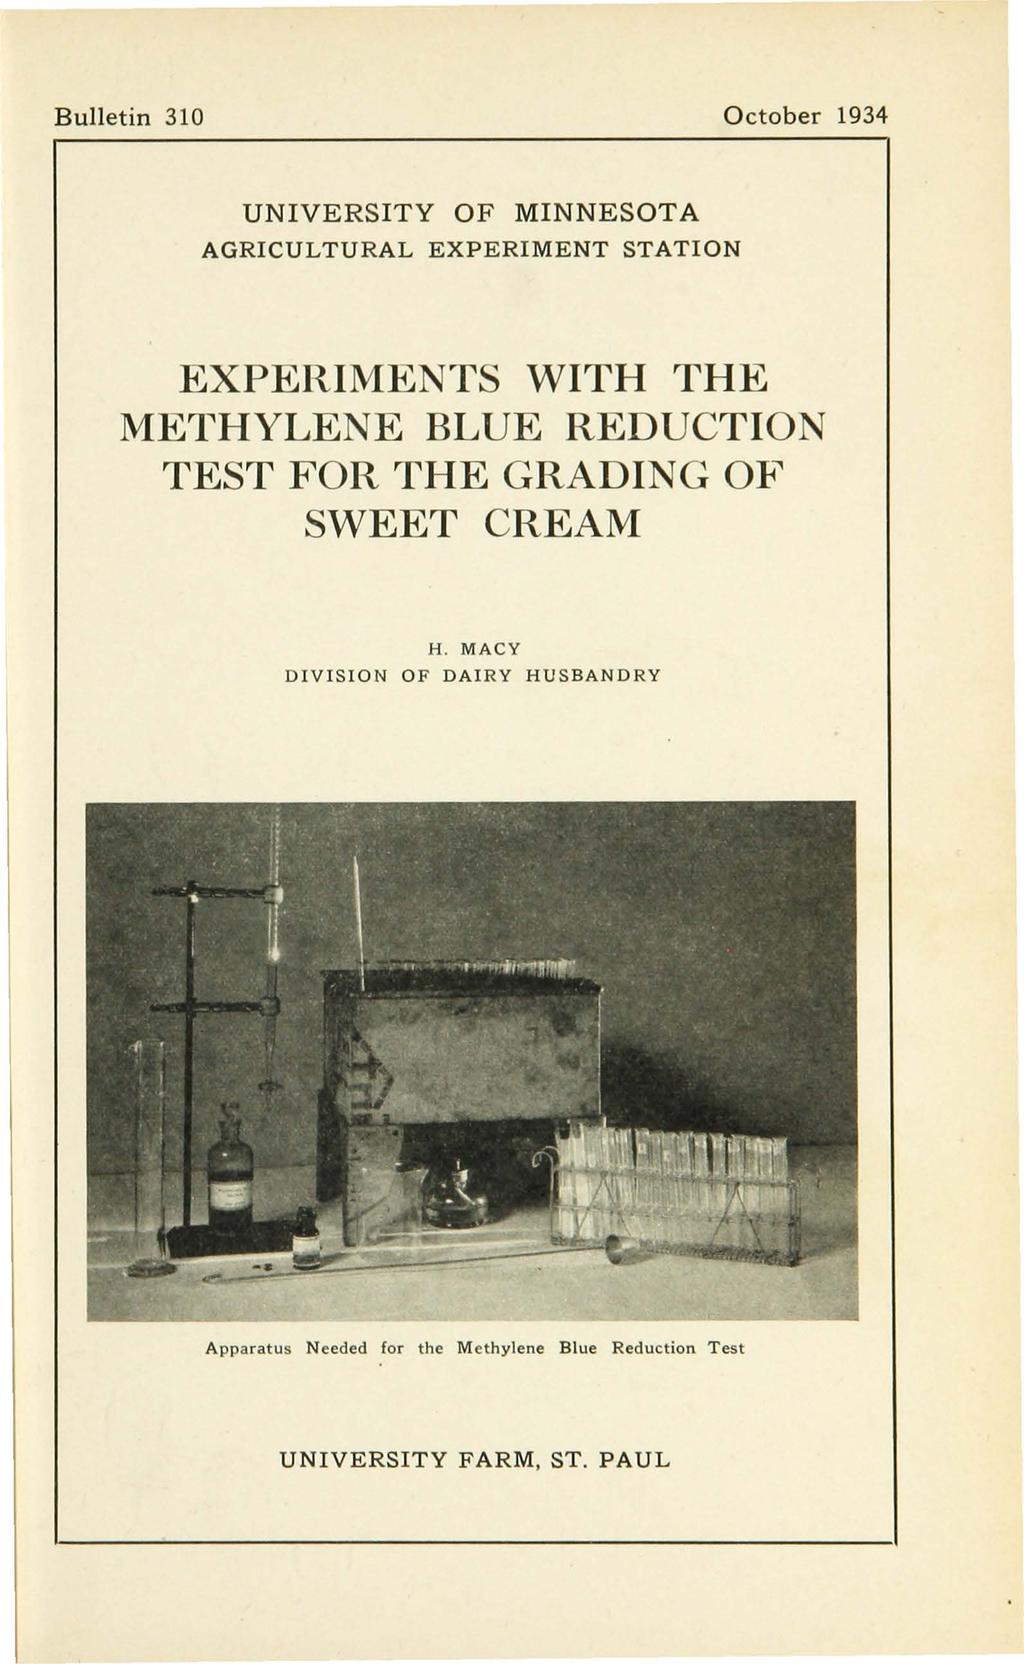 Bulletin 310 October 1934 UNIVERSITY OF MINNESOTA AGRICULTURAL EXPERIMENT STATION EXPERIMENTS WITH THE METHYLENE BLUE REDUCTION TEST FOR THE